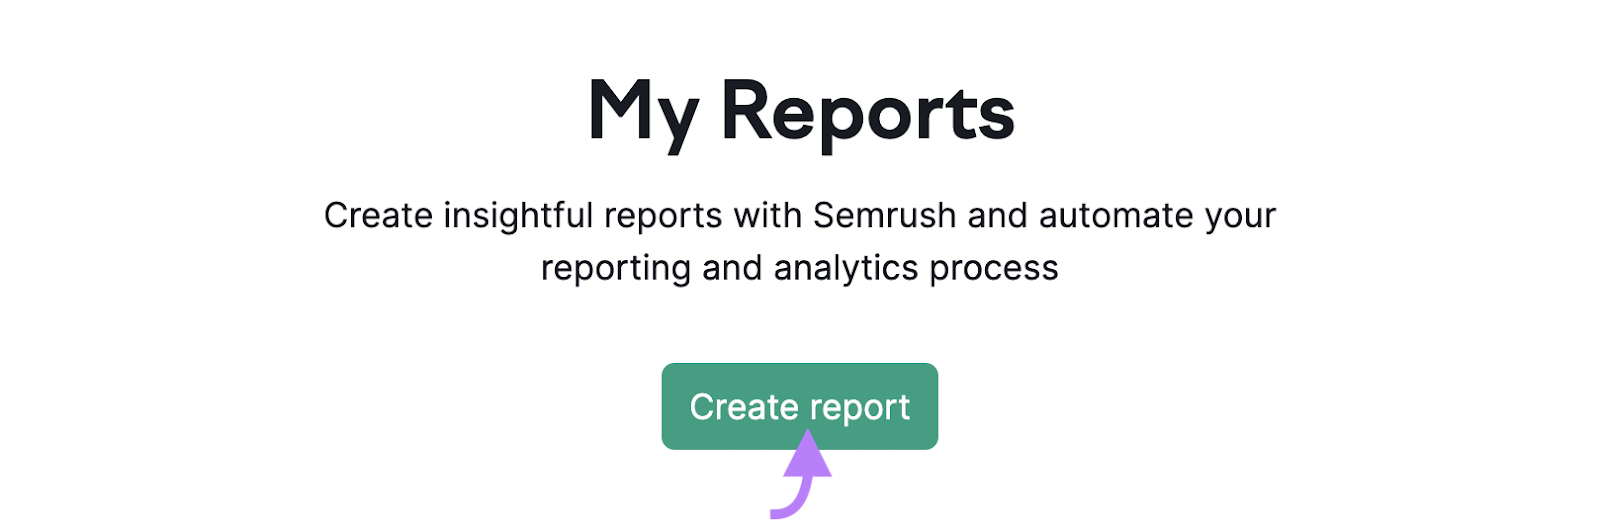 "Create reports" button highlighted on My Reports page